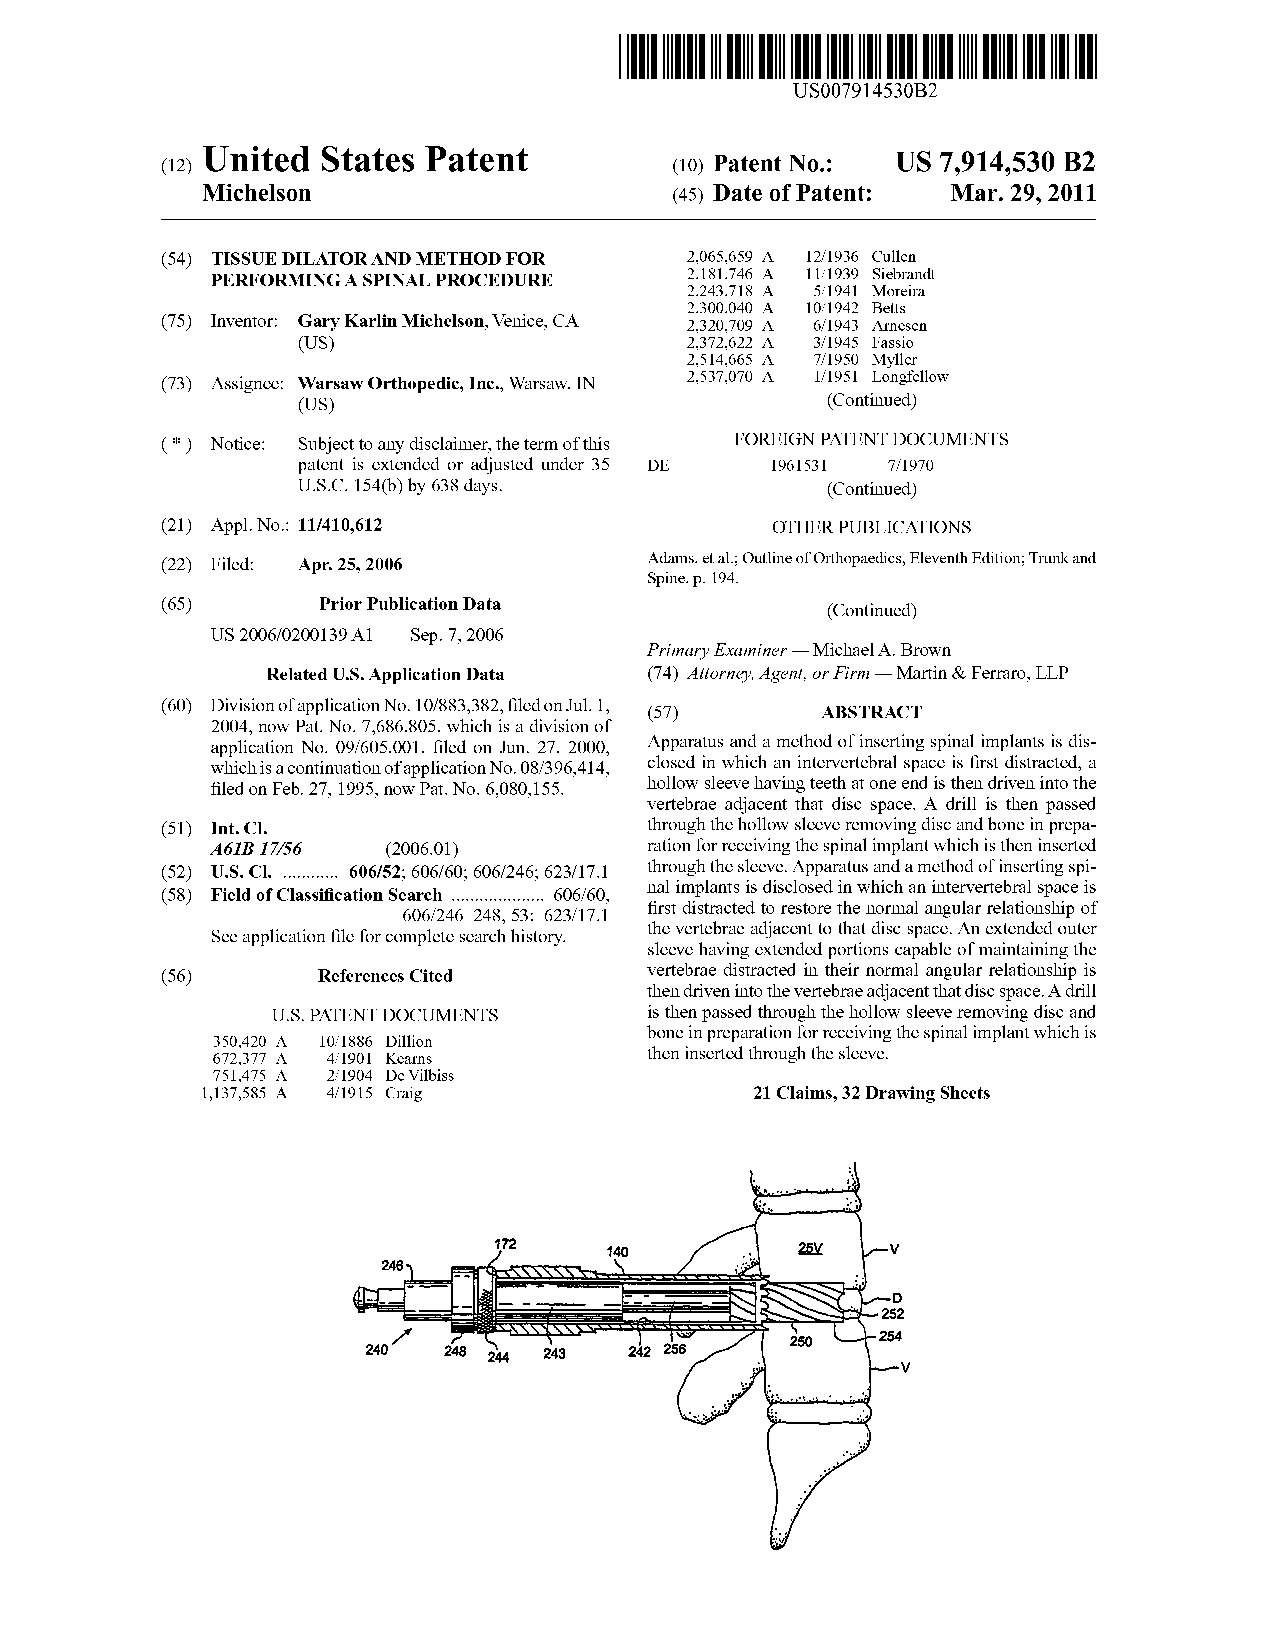 Tissue dilator and method for performing a spinal procedure - Patent 7,914,530